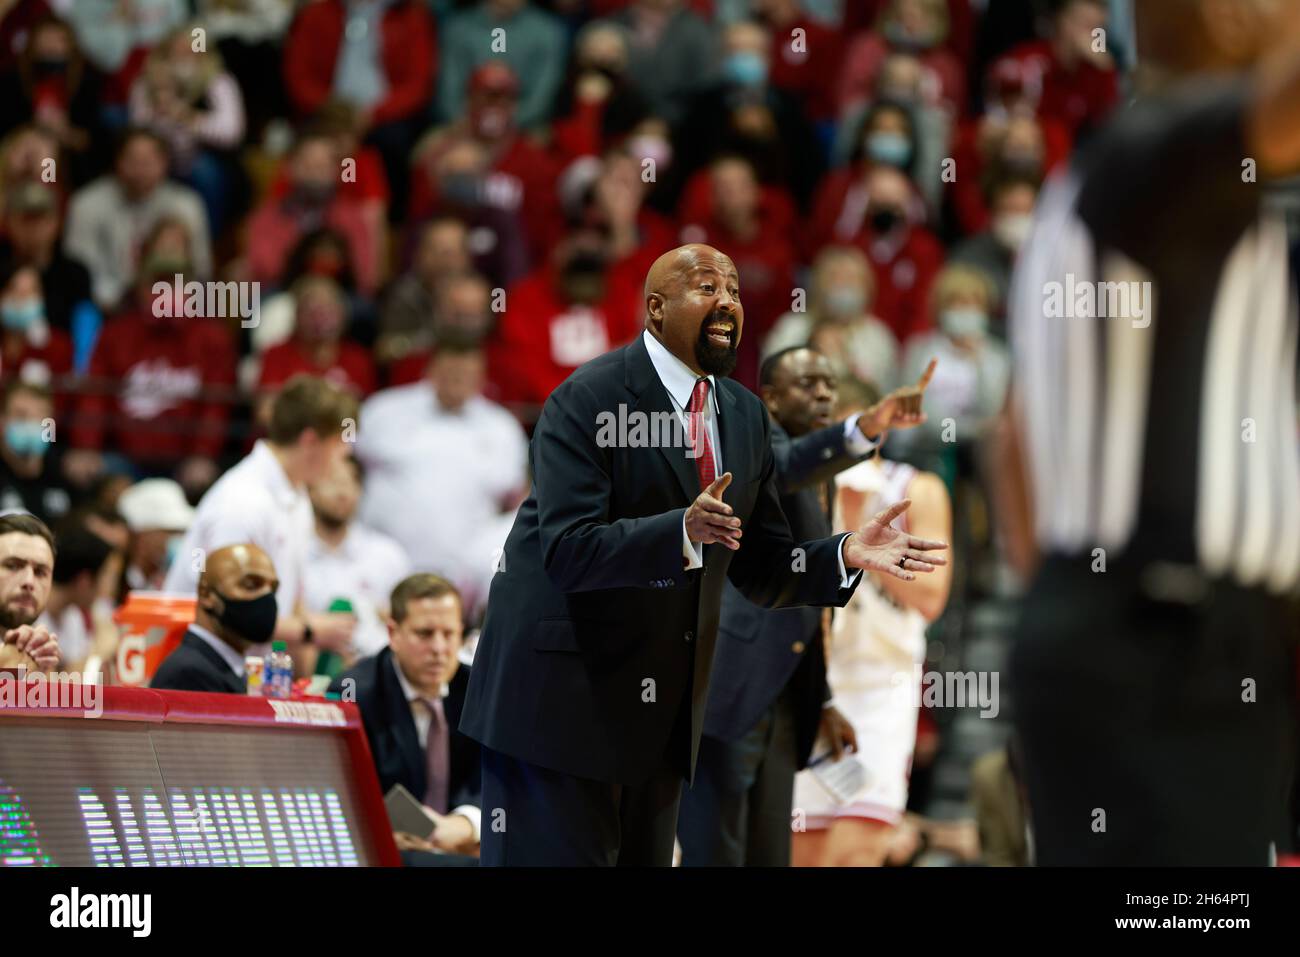 Bloomington, USA. 12th Nov, 2021. Indiana University coach Mike Woodson seen at a game against Northern Illinois University during an NCAA basketball game at Assembly Hall in Bloomington, Ind. The Indiana Hoosiers beat NIU 85-49. Credit: SOPA Images Limited/Alamy Live News Stock Photo